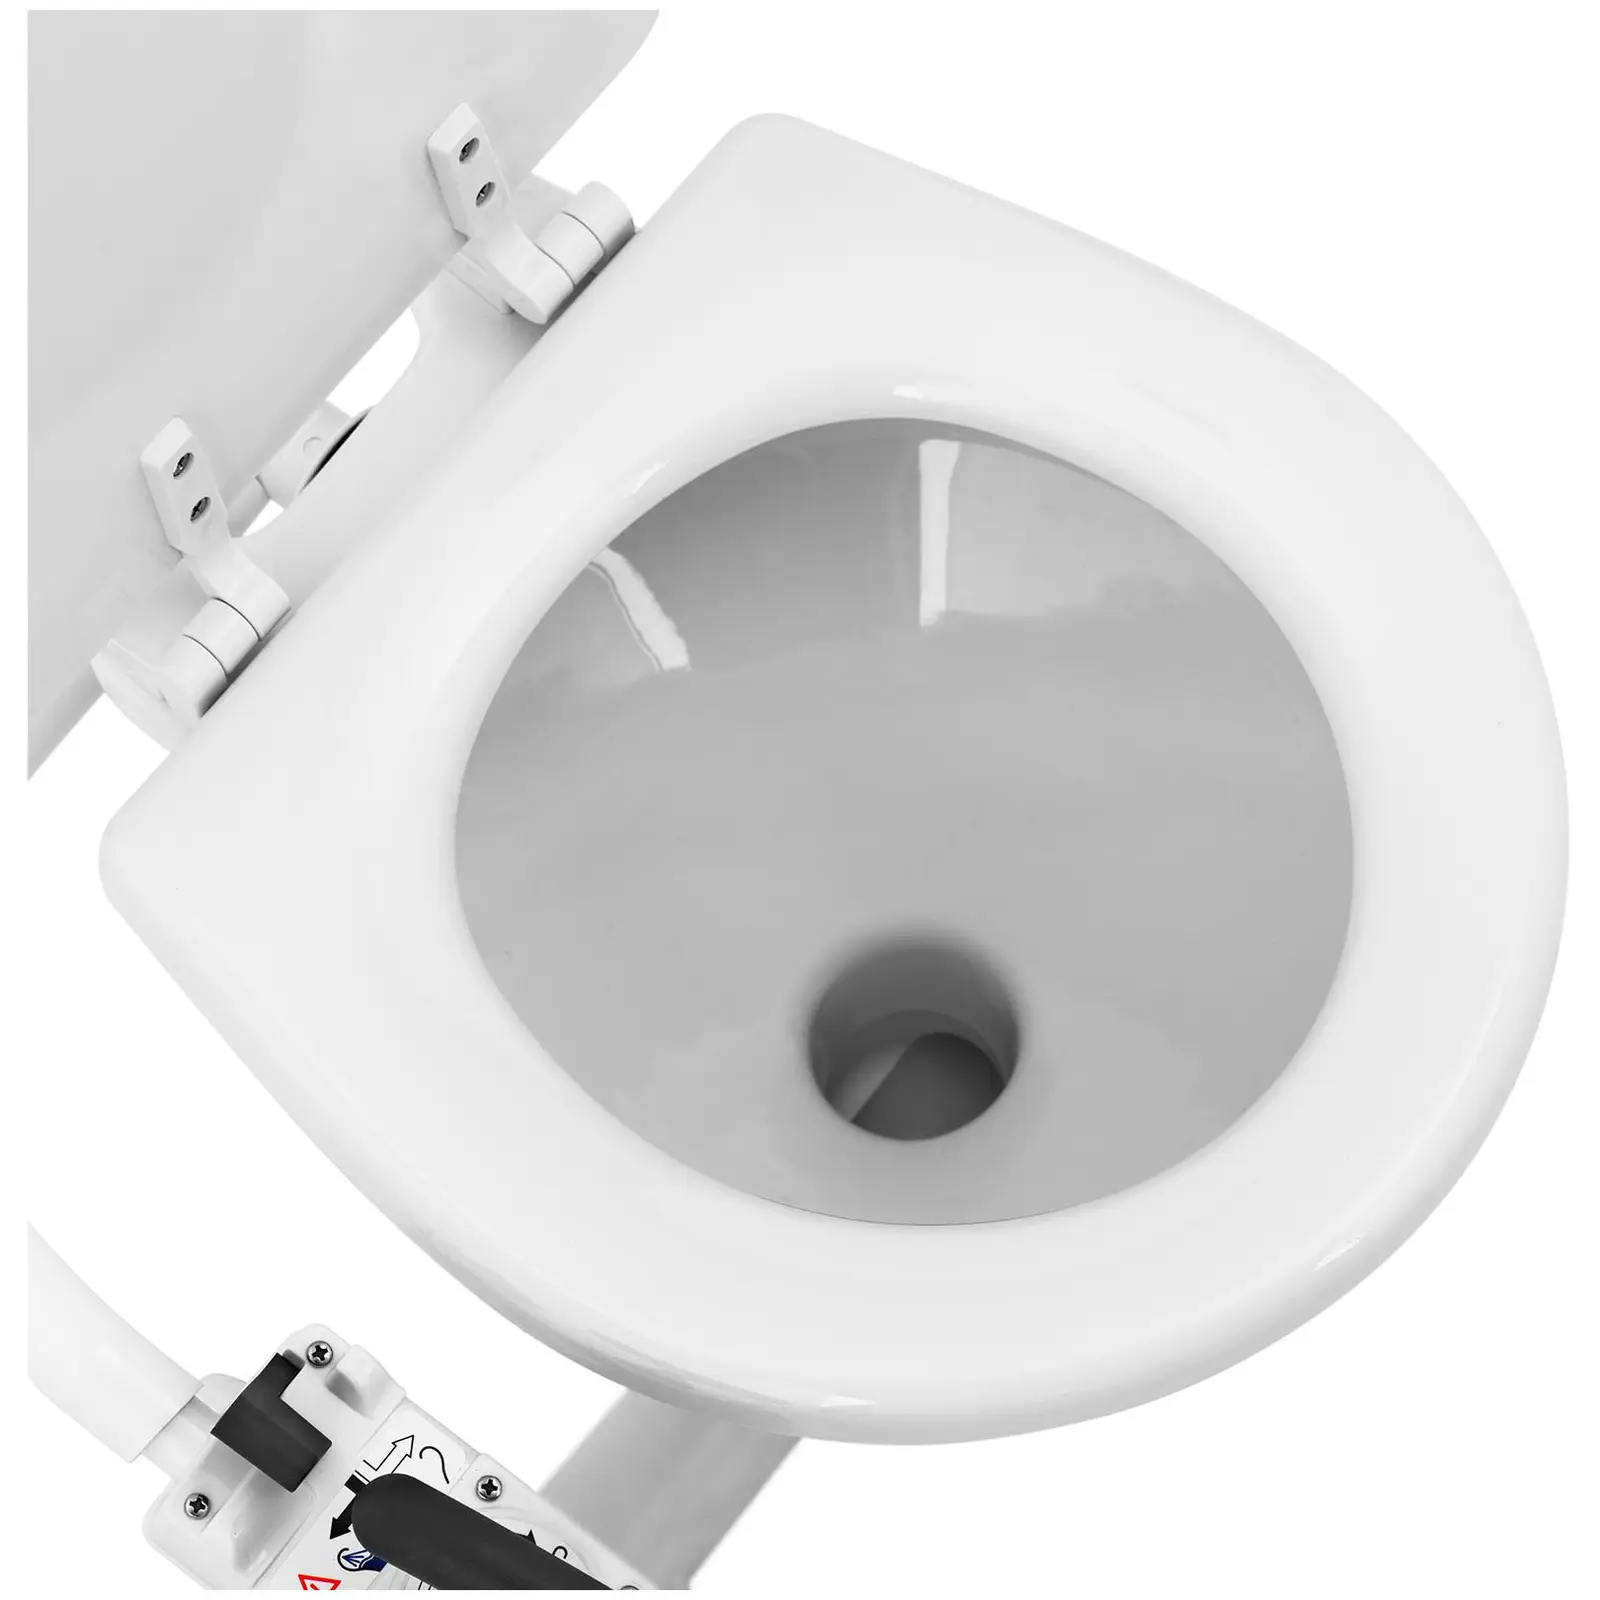 Boat toilet with hand pump - ceramic basin - convenient and compact